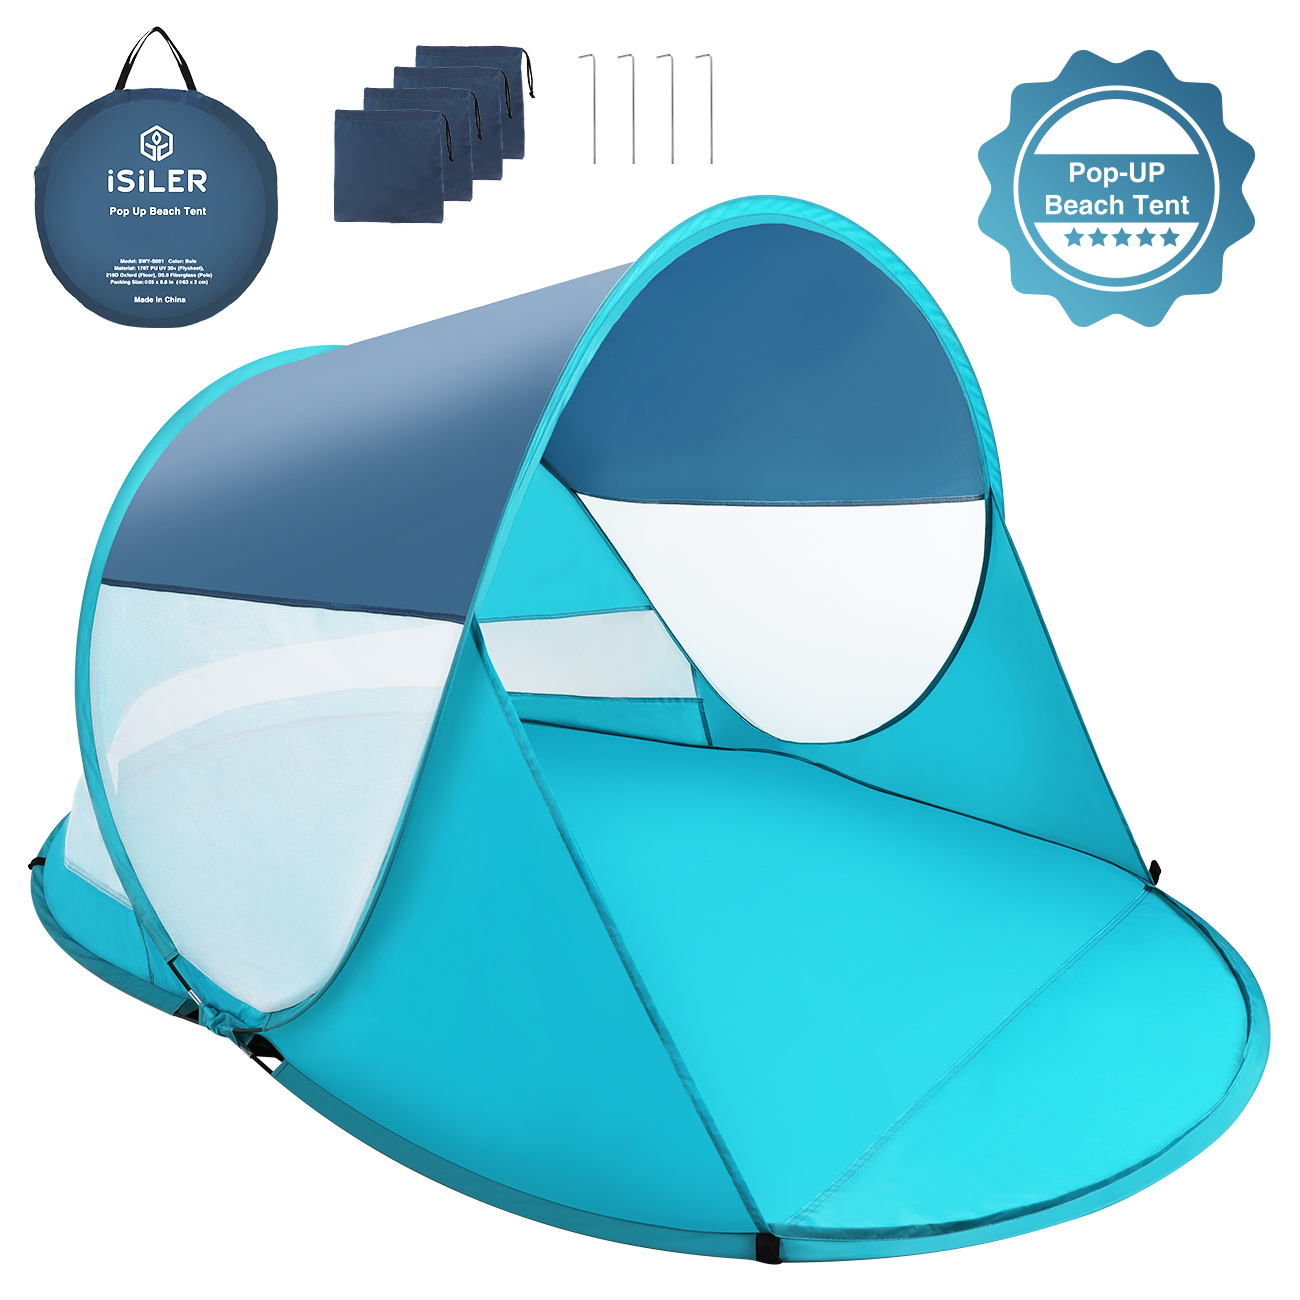 Rated UPF 50+ for UV Sun Protection Fishing Beach Shelter Pop Up Tent for 2-3 People Waterproof Sun Shade for Family Camping Picnic Automatic Instant Pop Up Beach Portable Baby Canopy